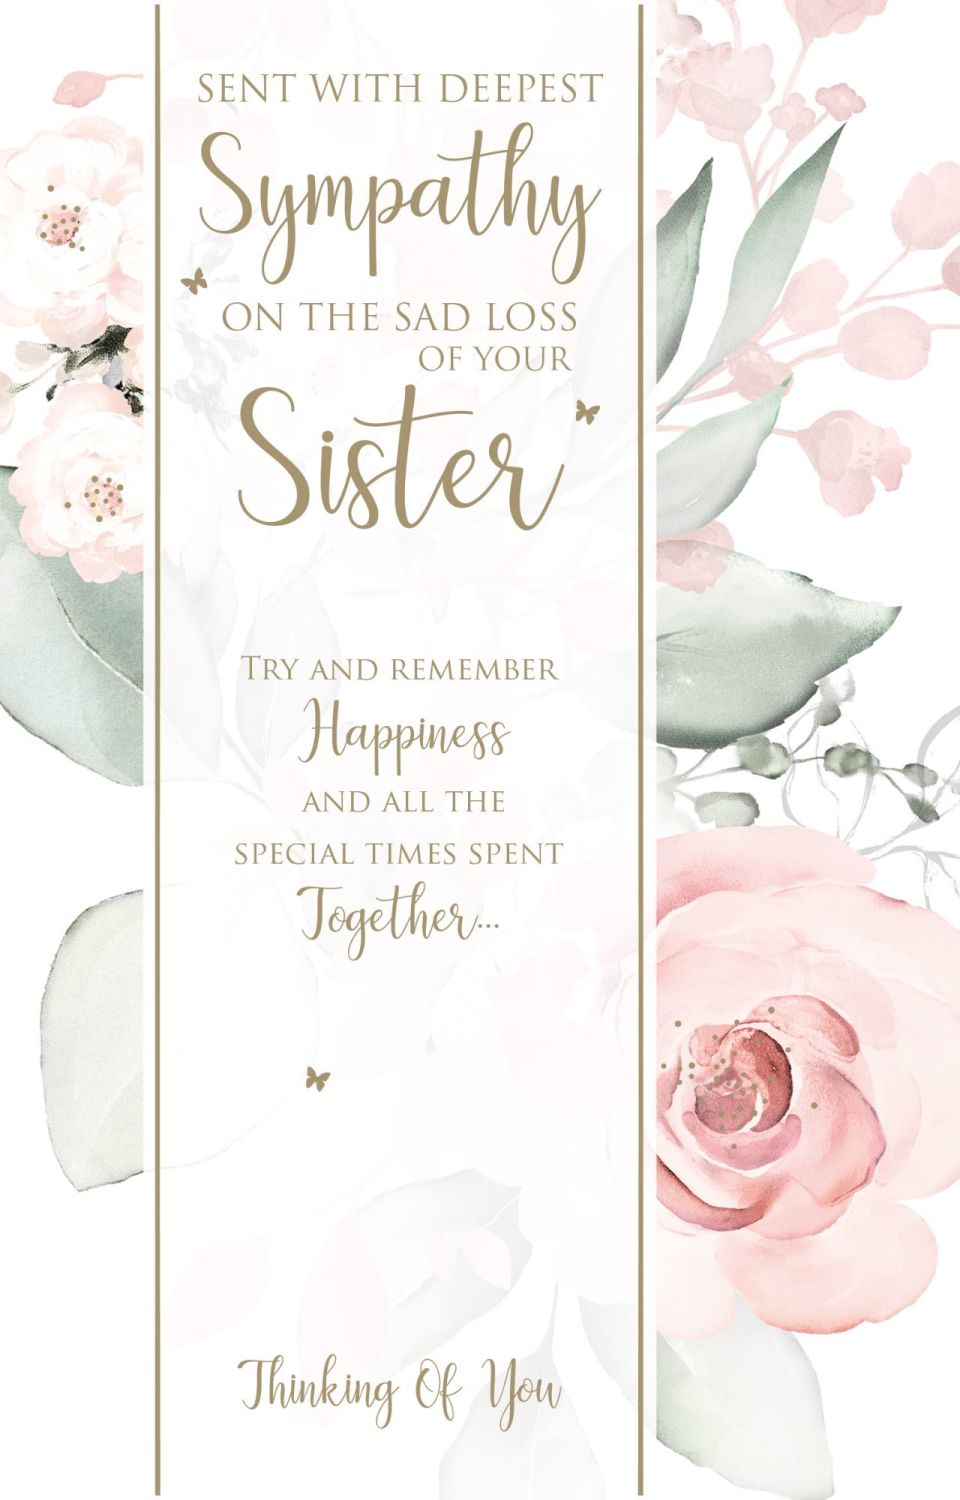 Sent With Deepest Sympathy - LOSS Of SISTER Card - PRETTY Pink FLORAL & GOL